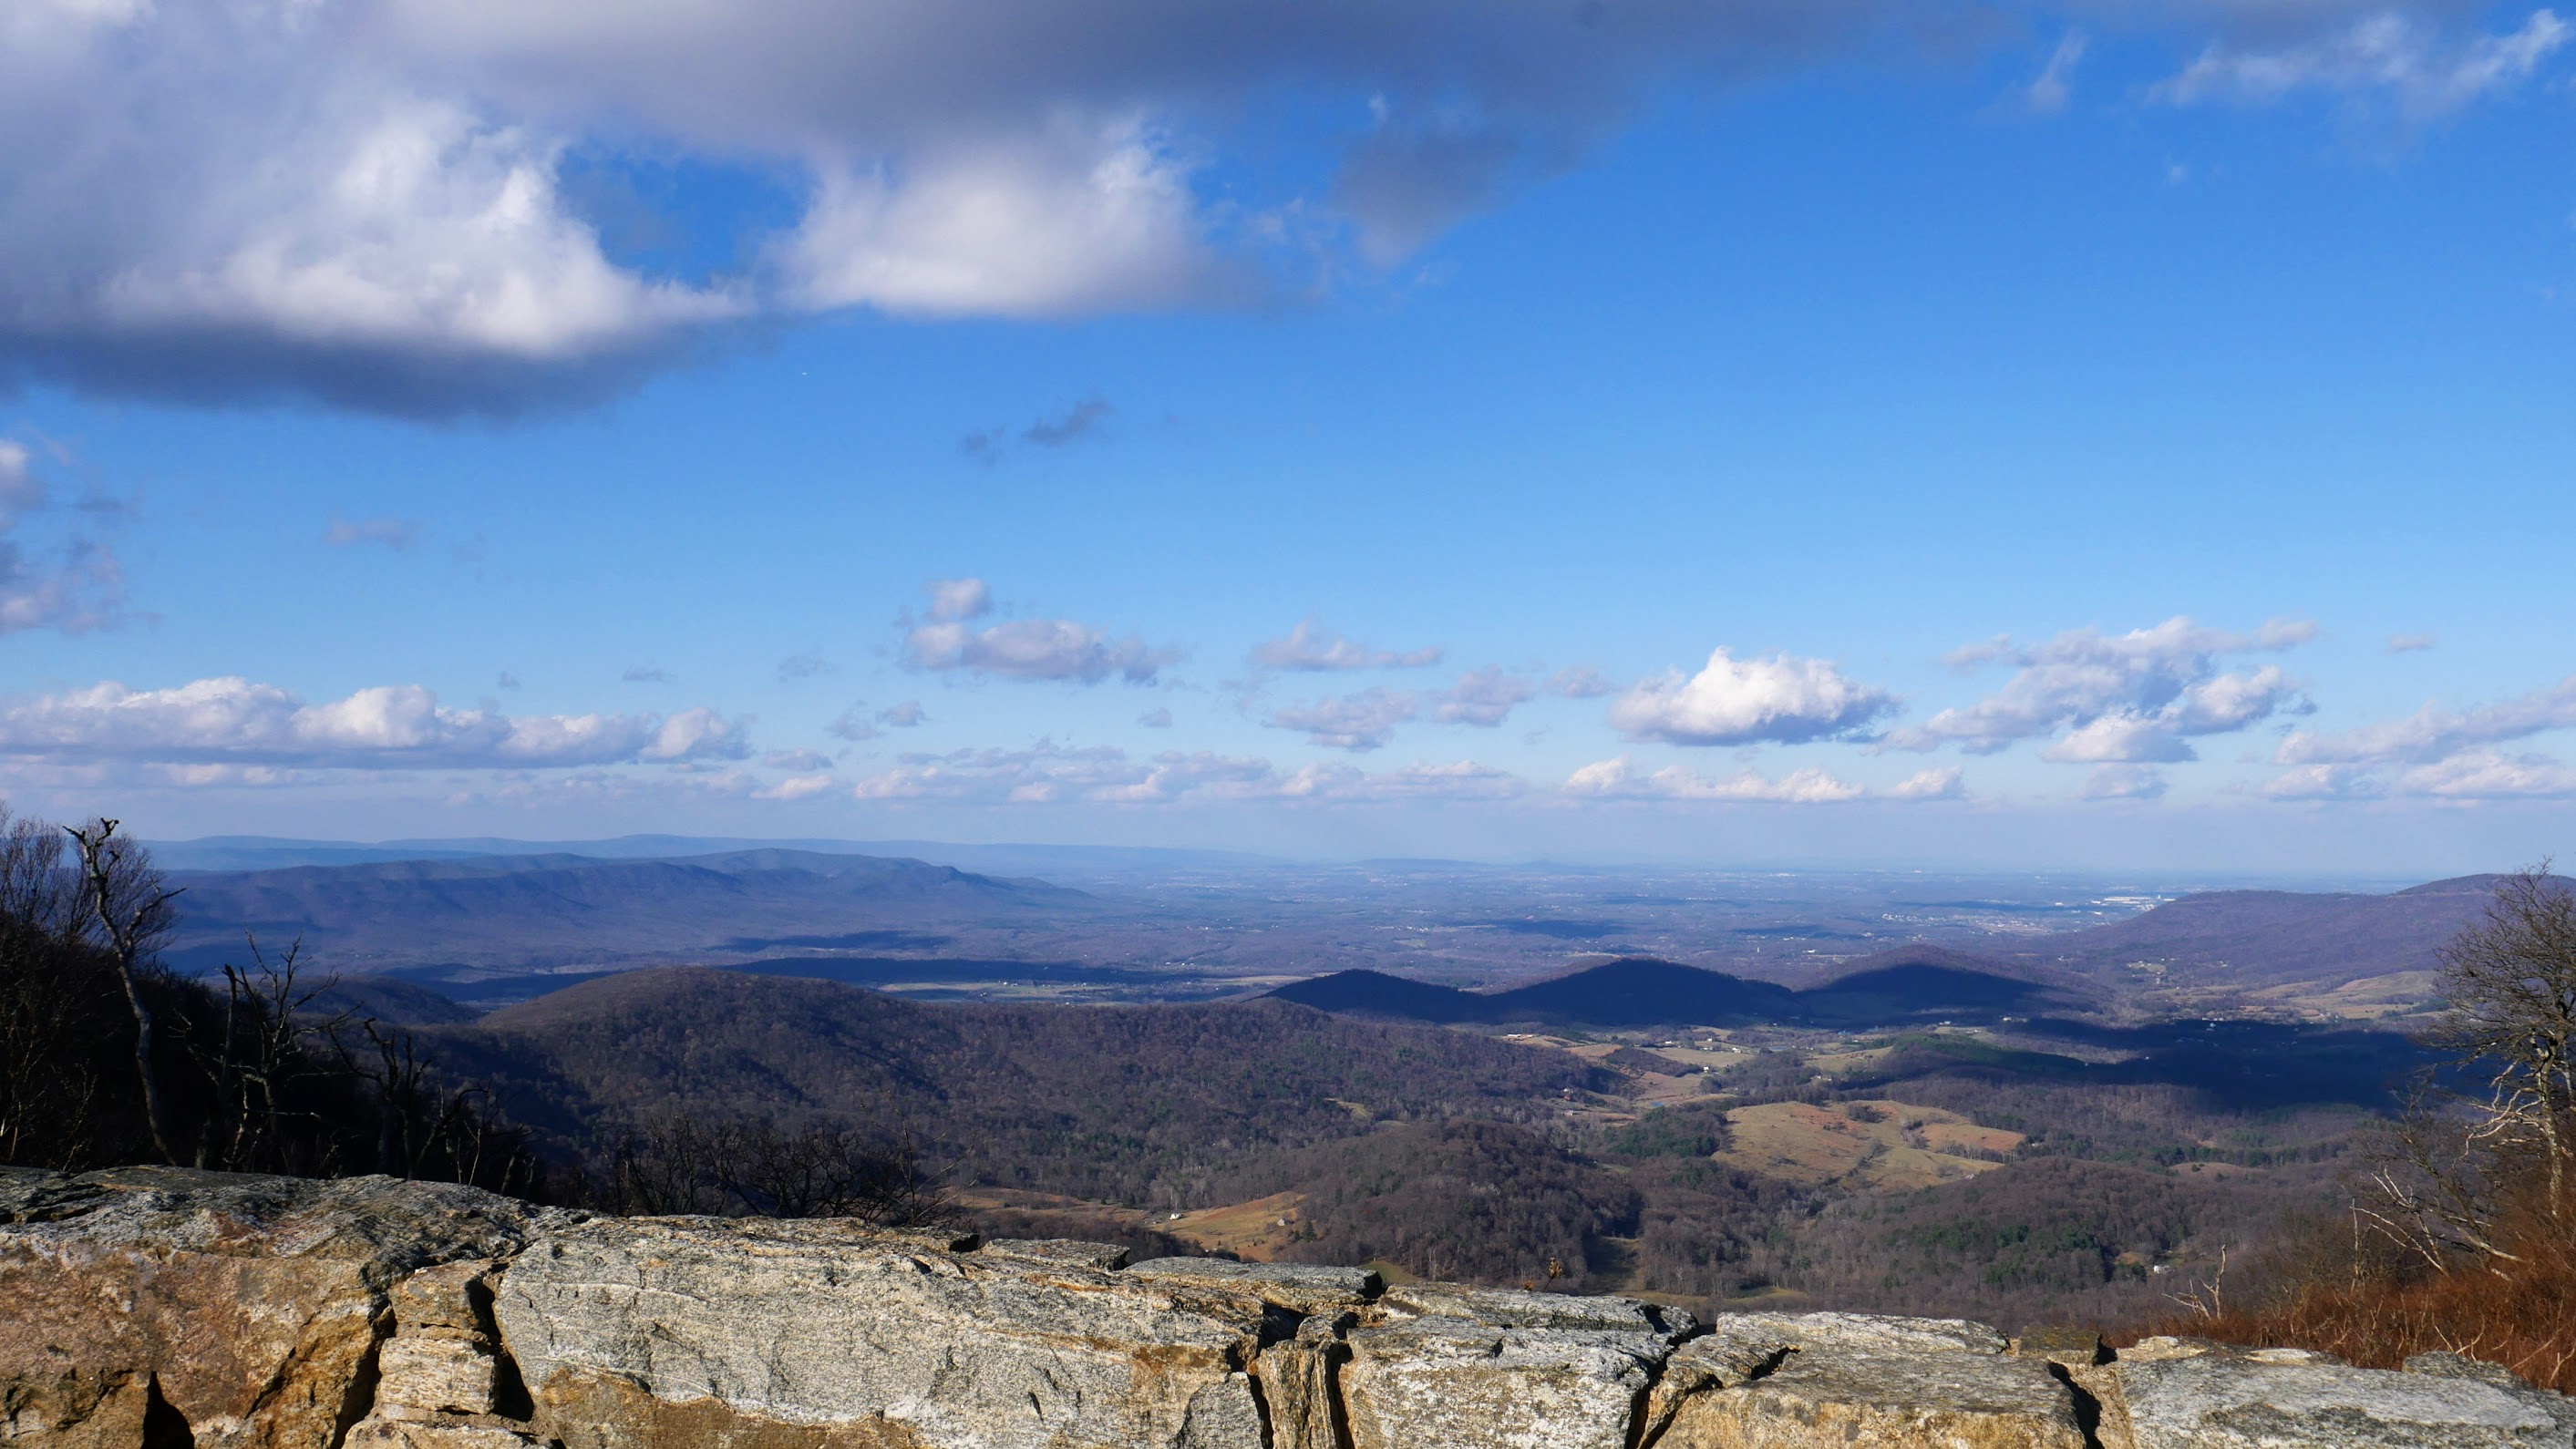 Will see you next time, Shenandoah NP!